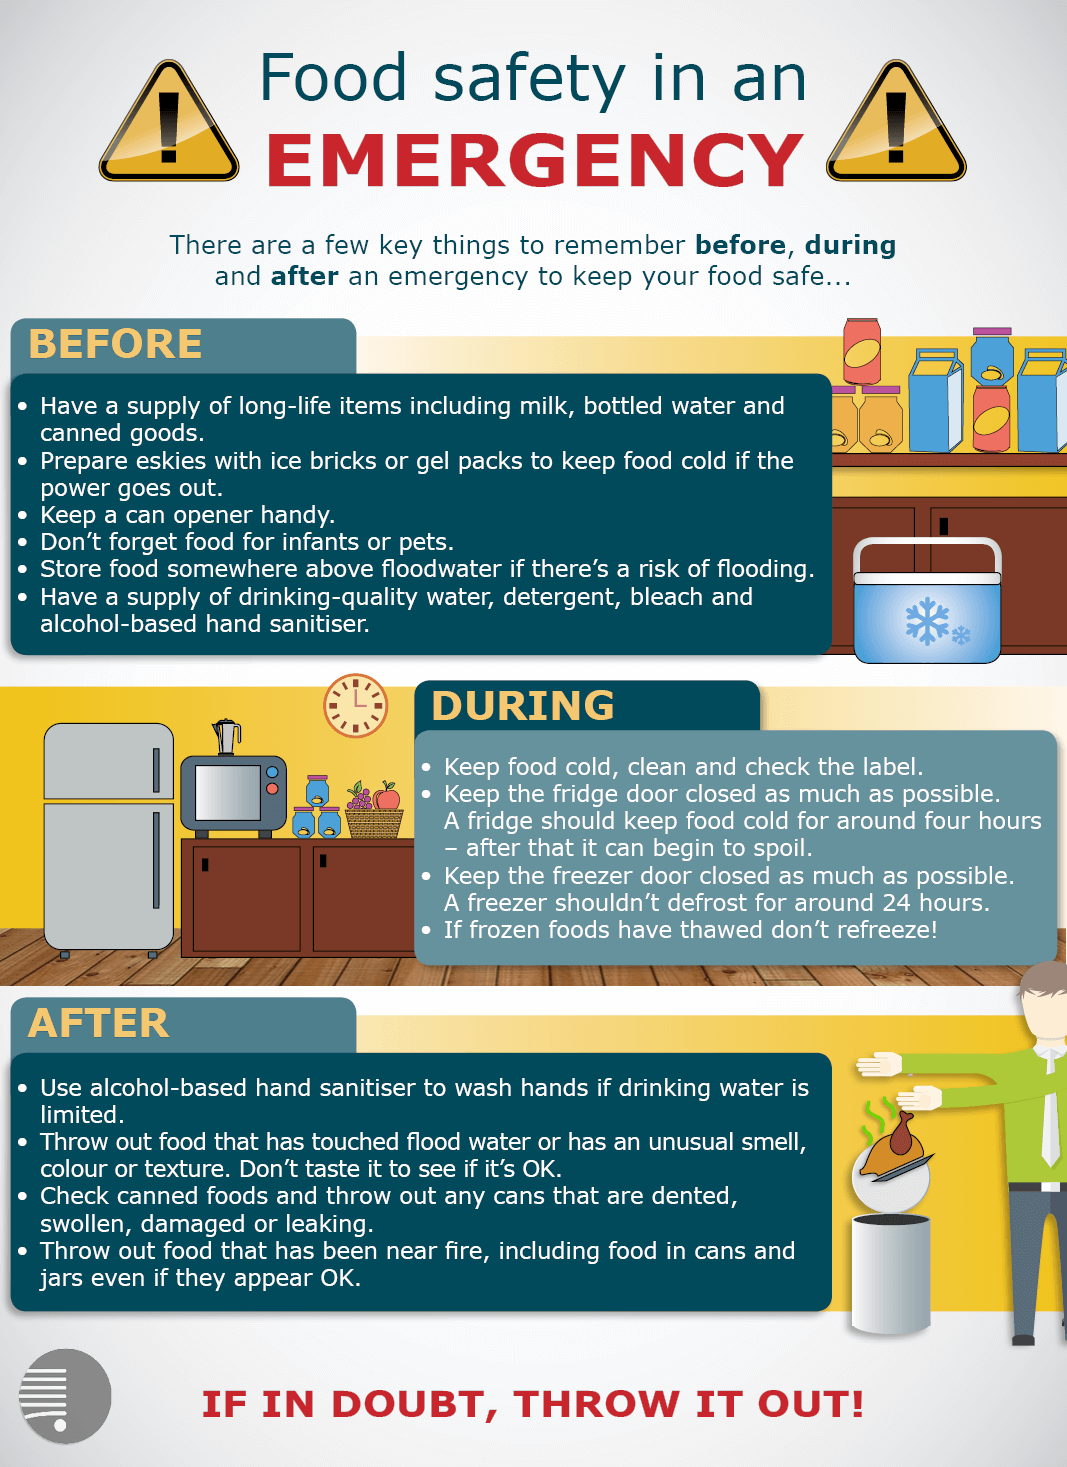 food safety in an emergency infographic. for a more detailed explaination email information@foodstandards.gov.au